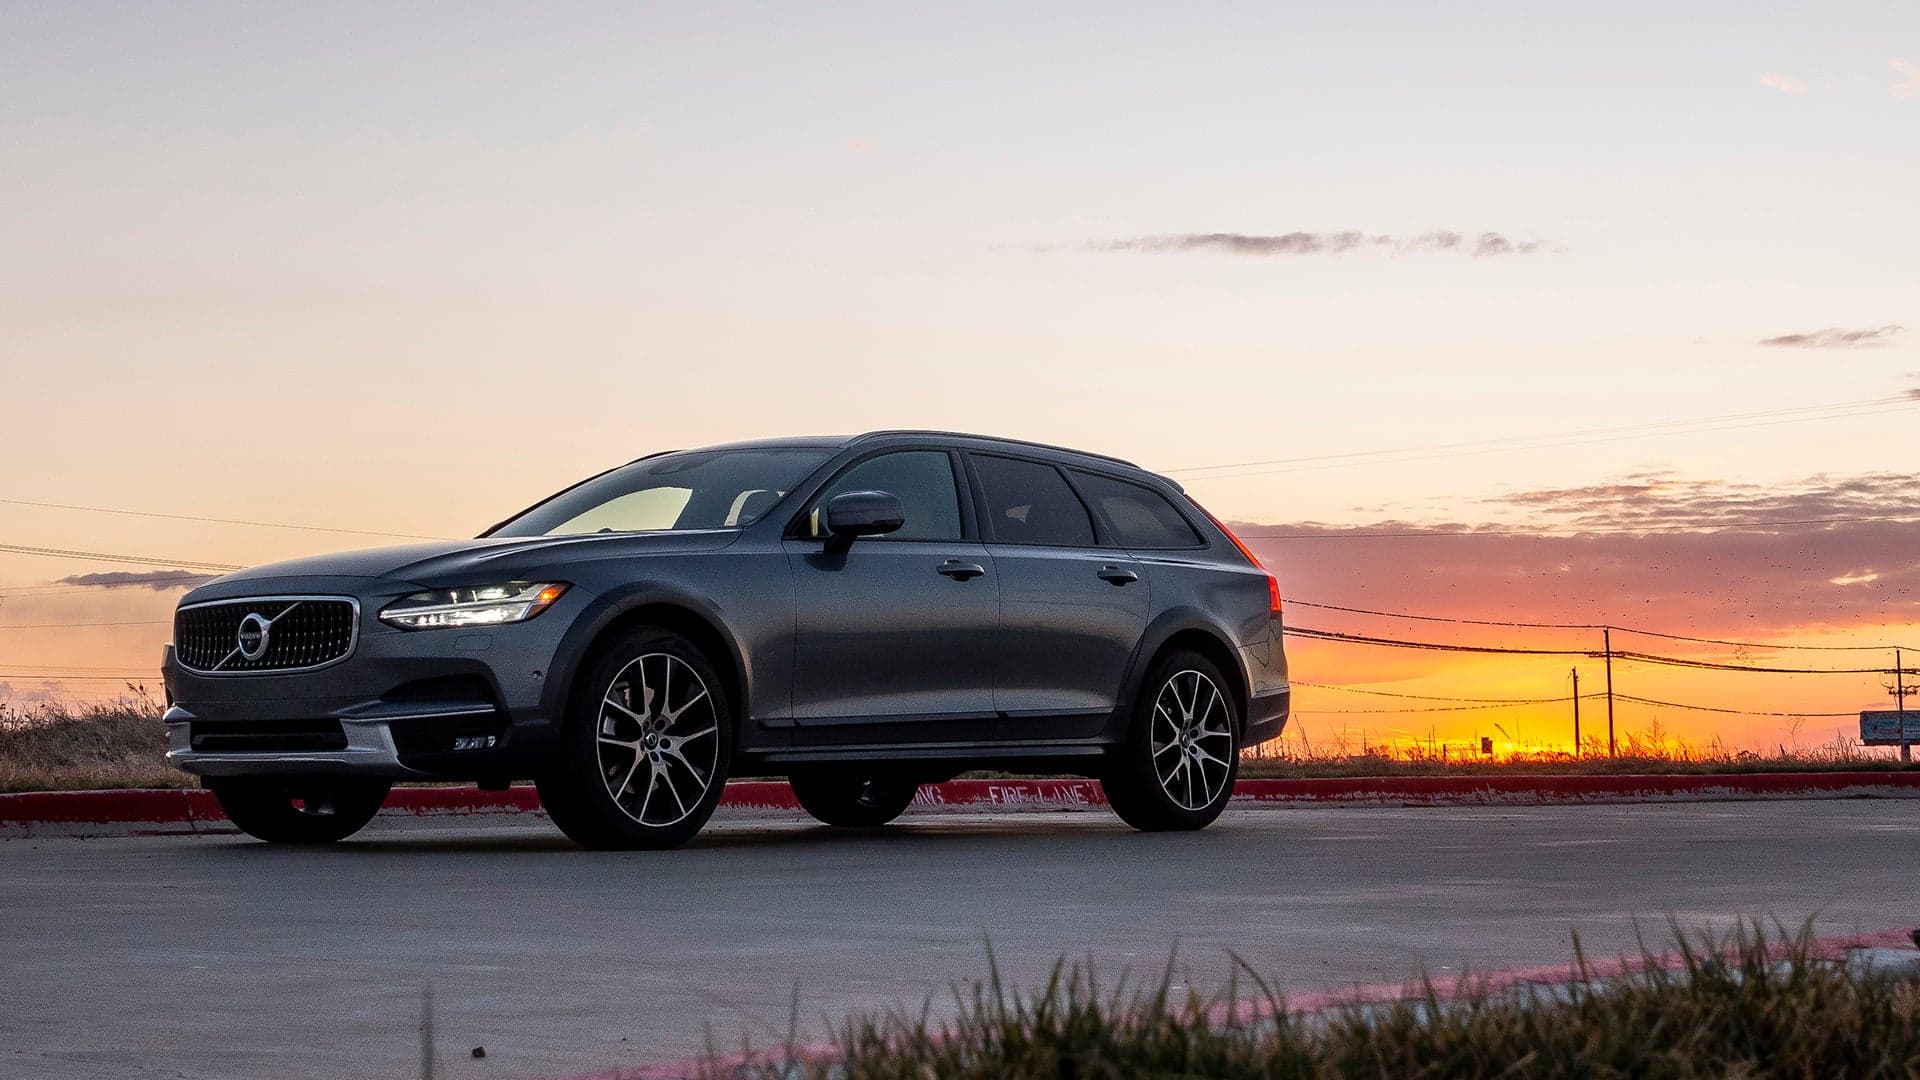 The Way Home: 7,000 Miles in the 2020 Volvo V90 Cross Country Taught Me to Let Go and Enjoy the Ride